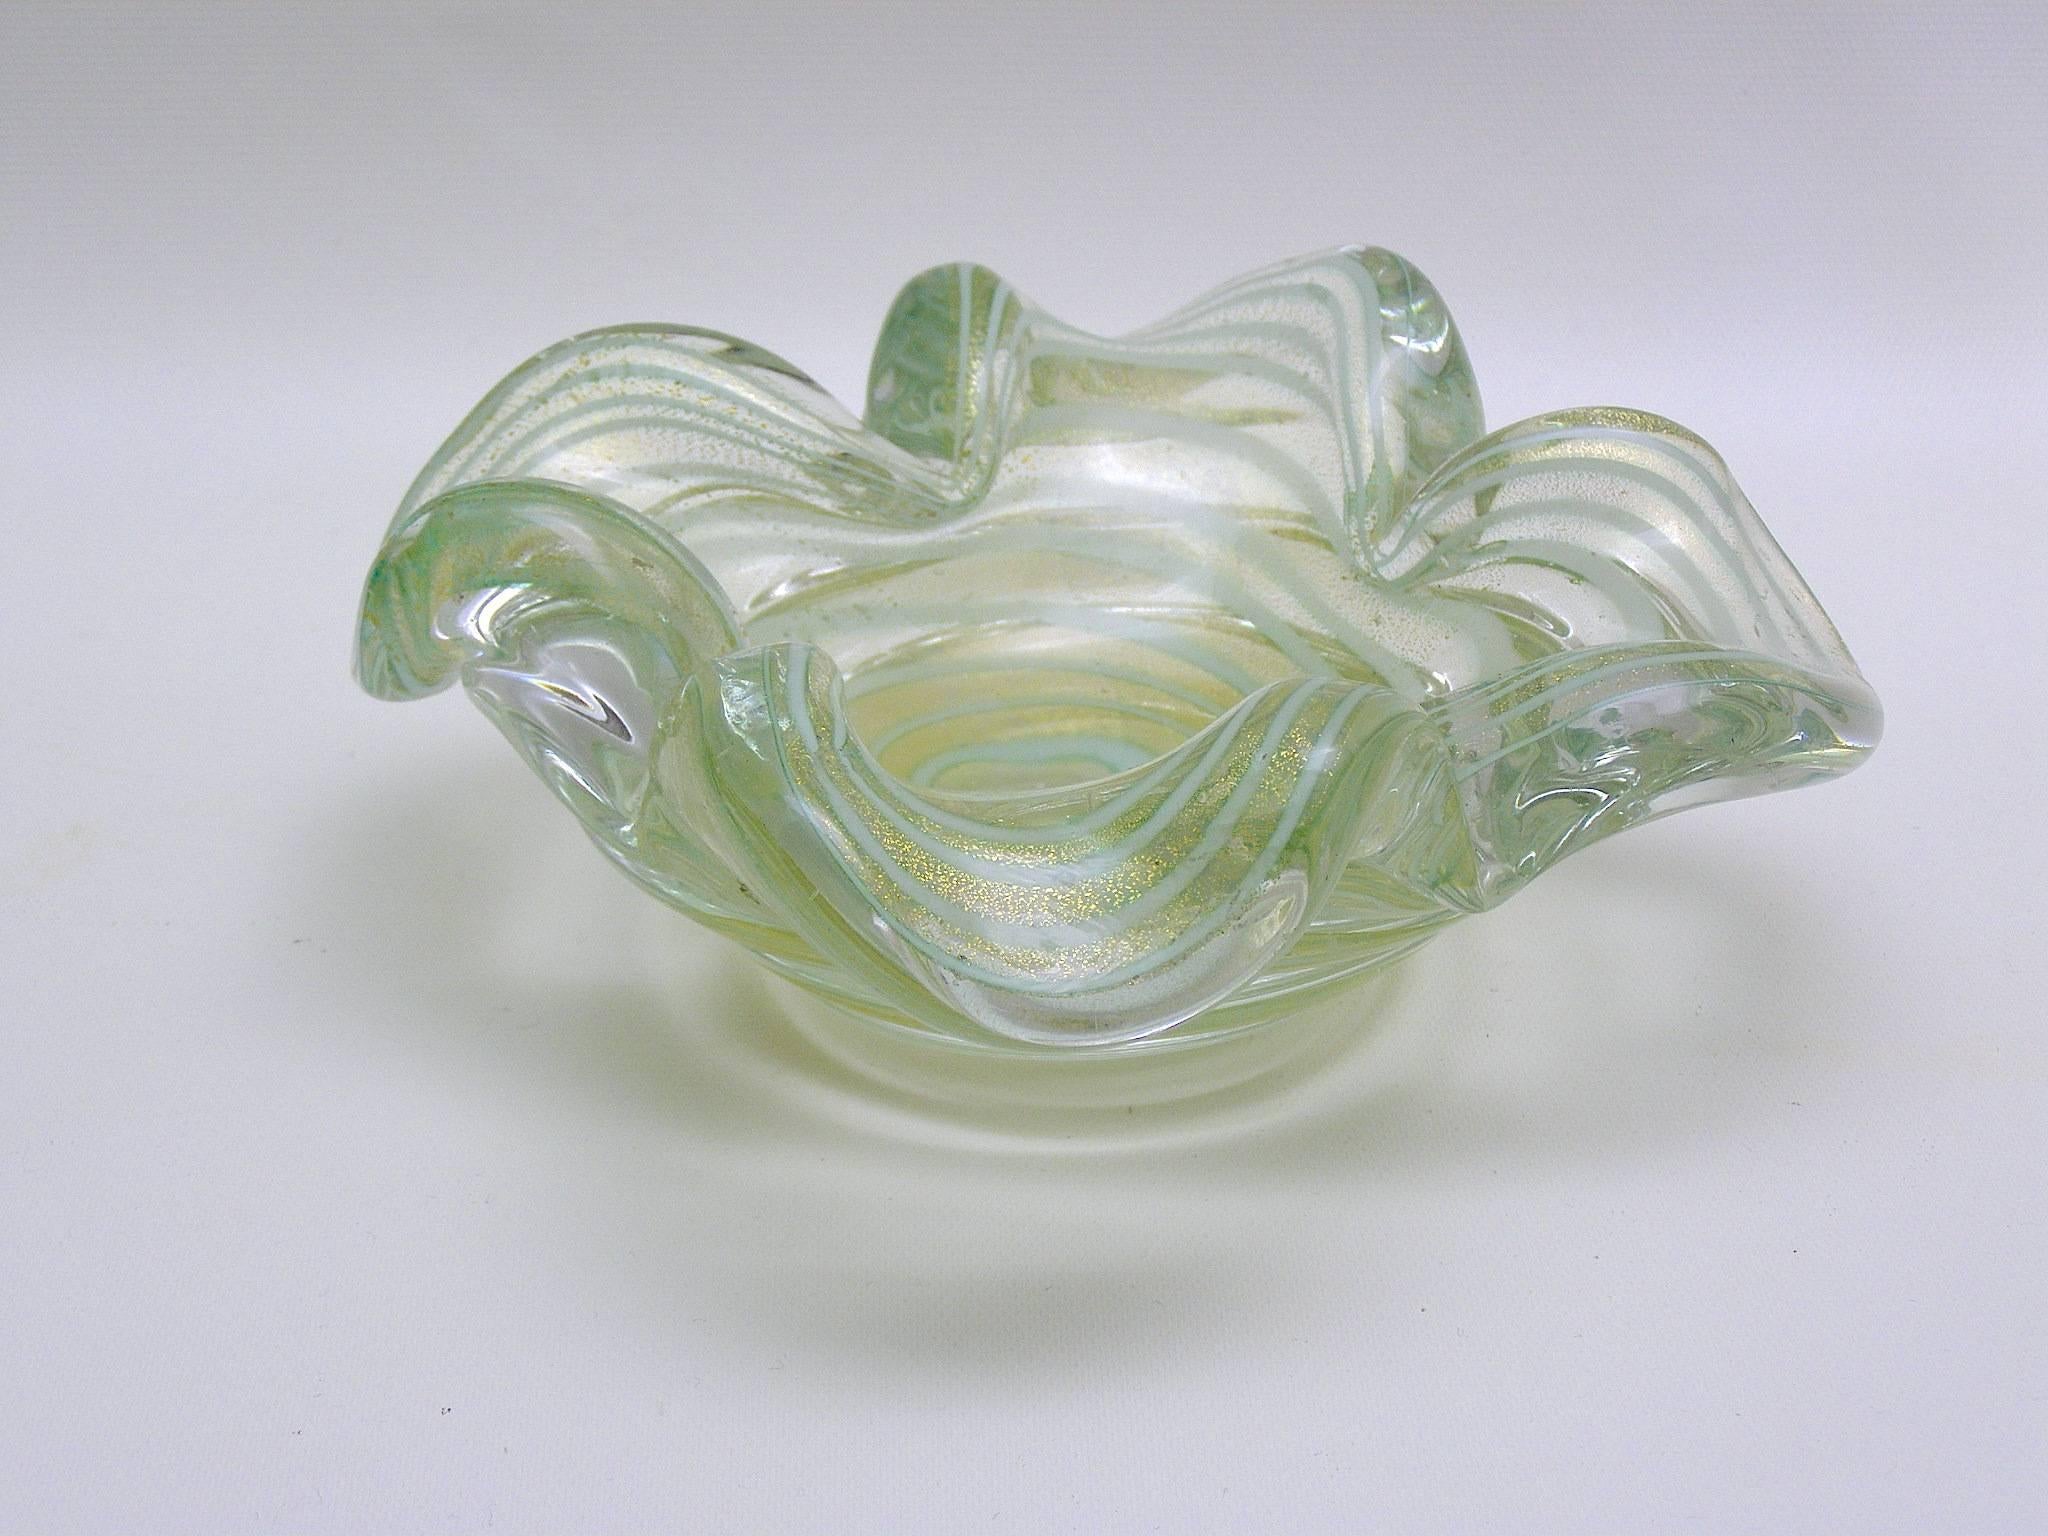 Handblown Murano glass vide-poche/ catchall/ round dish in beautiful green and gold flecking with light aqua swirls running through it. Beautiful on display and also a useful piece of functional art glass.